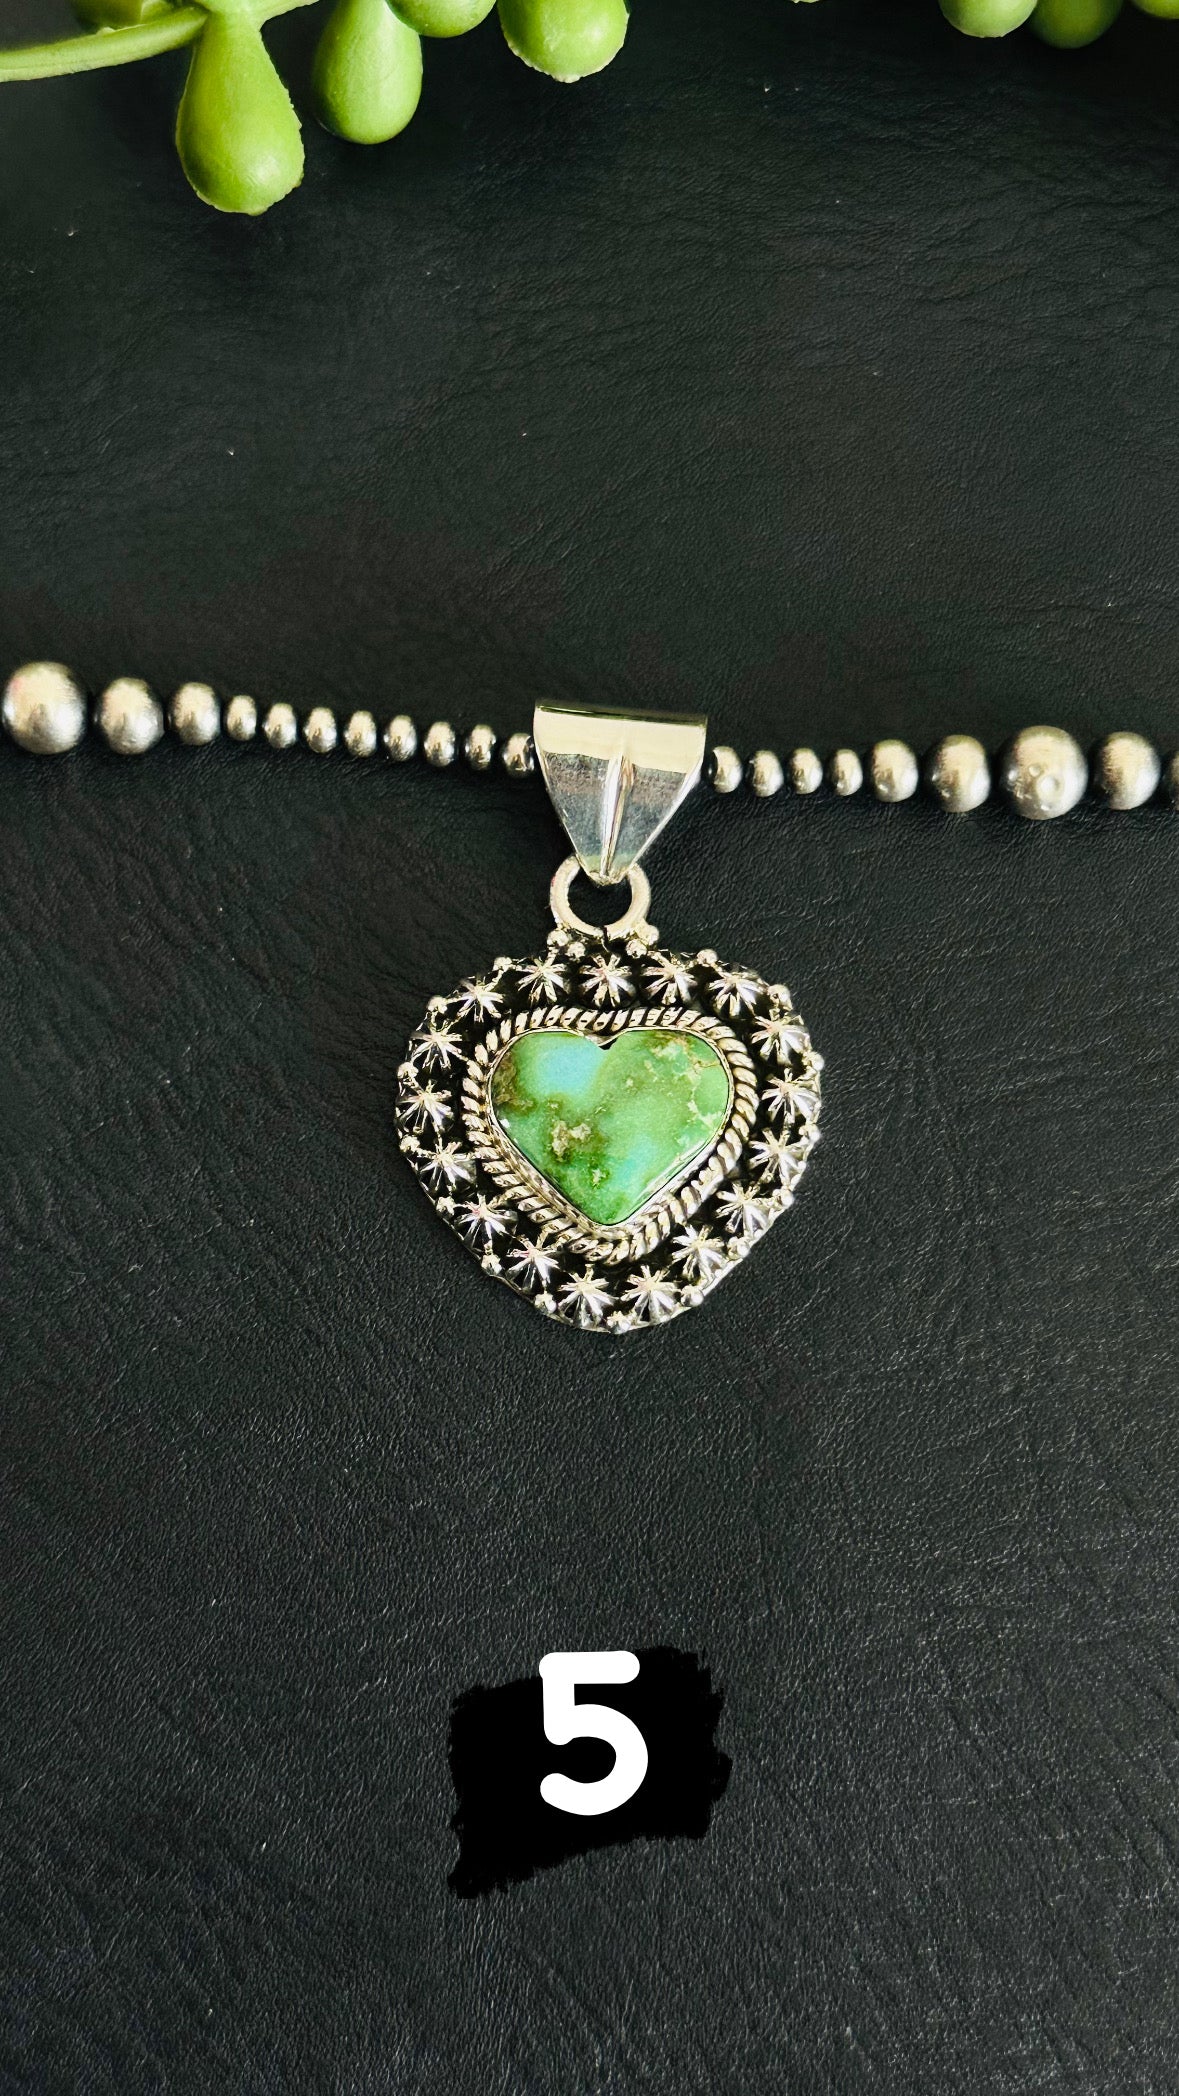 Southwest Handmade Sonoran Gold Turquoise & Sterling Silver Heart Pendant